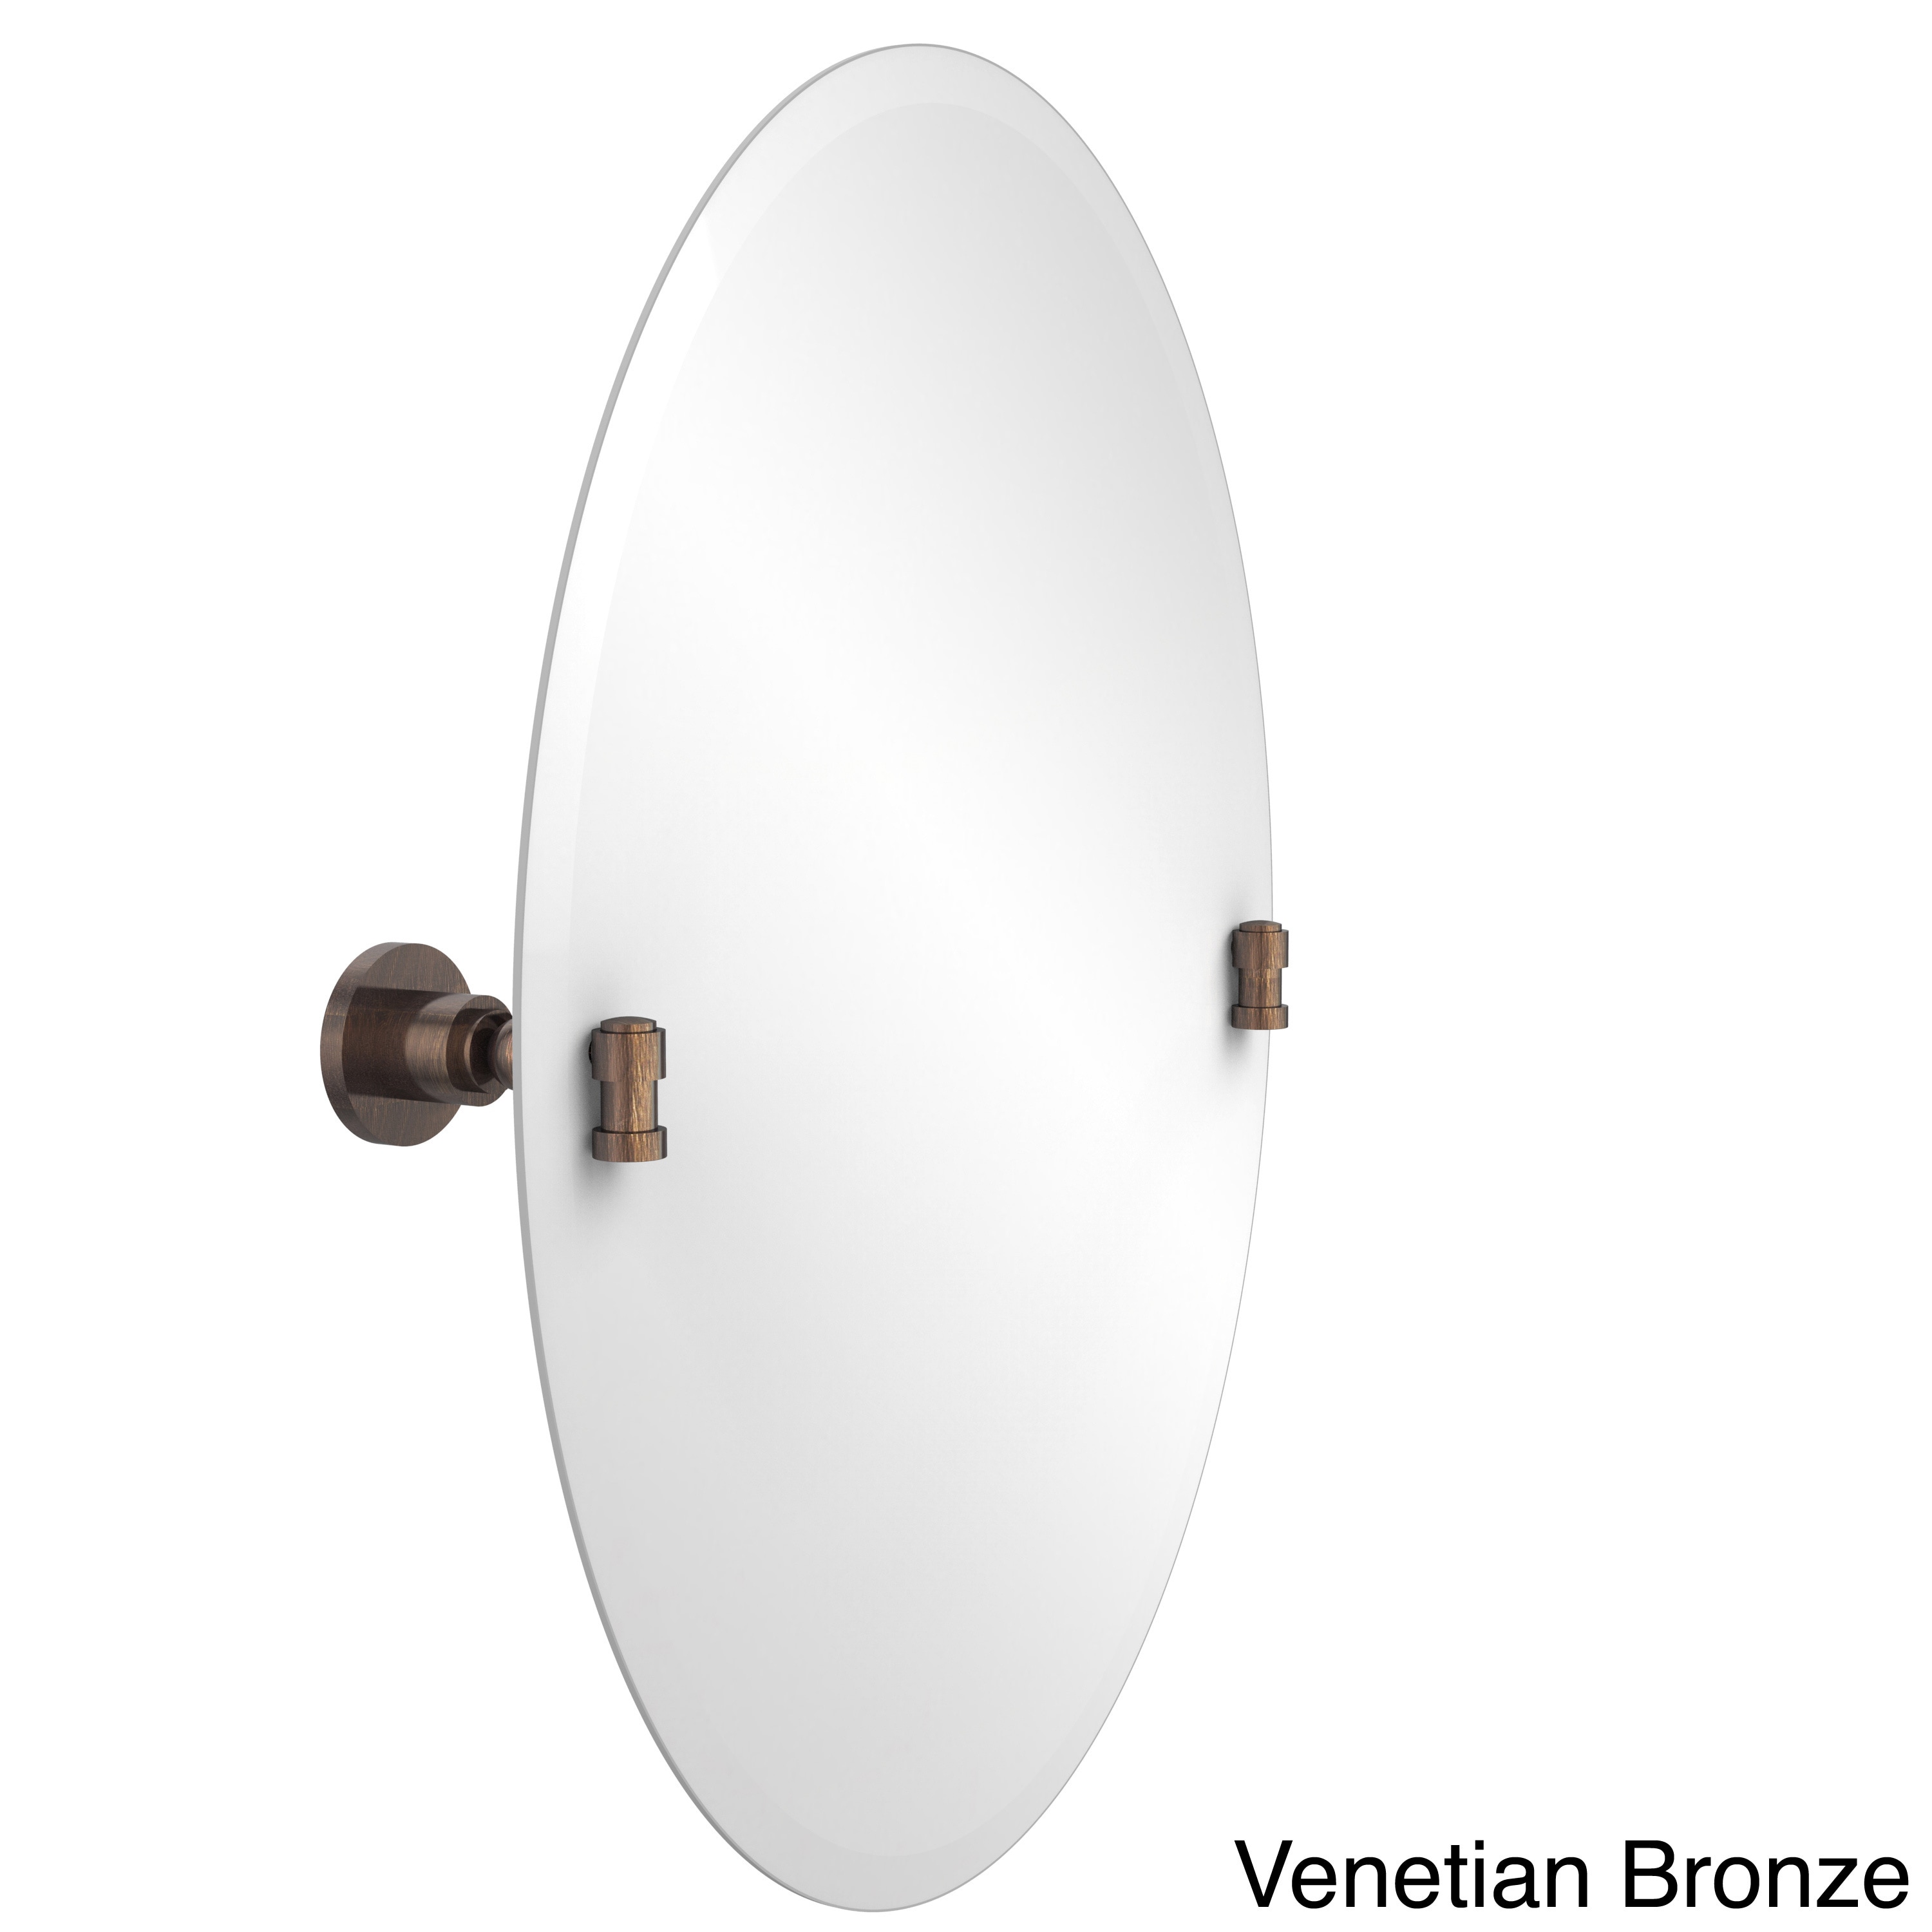 Frameless Oval Tilt Wall Mirror with Beveled Edge, Washington Square Collection - 22"d